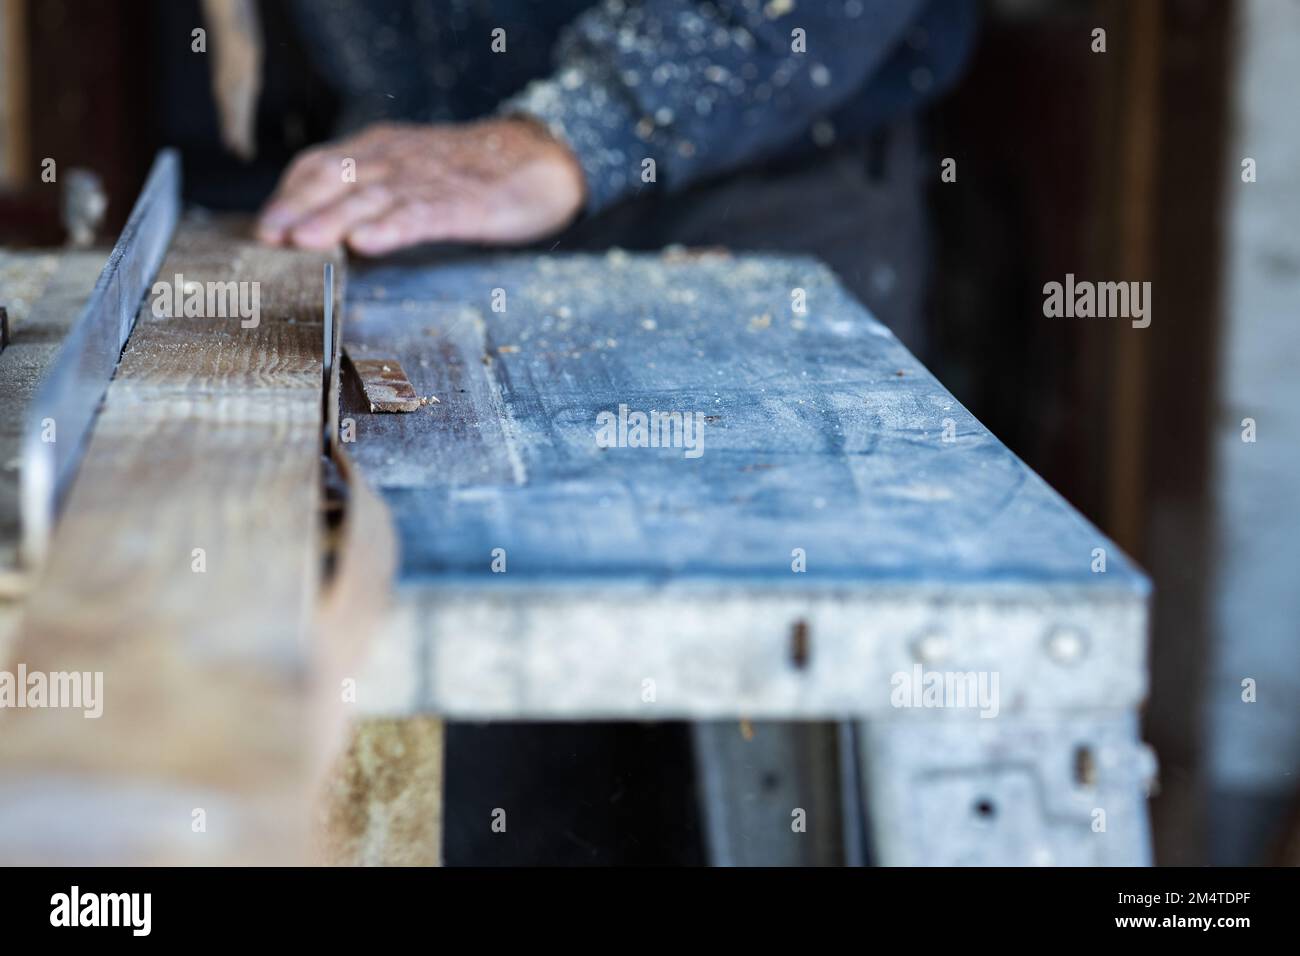 close-up photo of a circular saw cutting a wooden batten.in the blurred background is a worker's hand holding a wooden lath Stock Photo